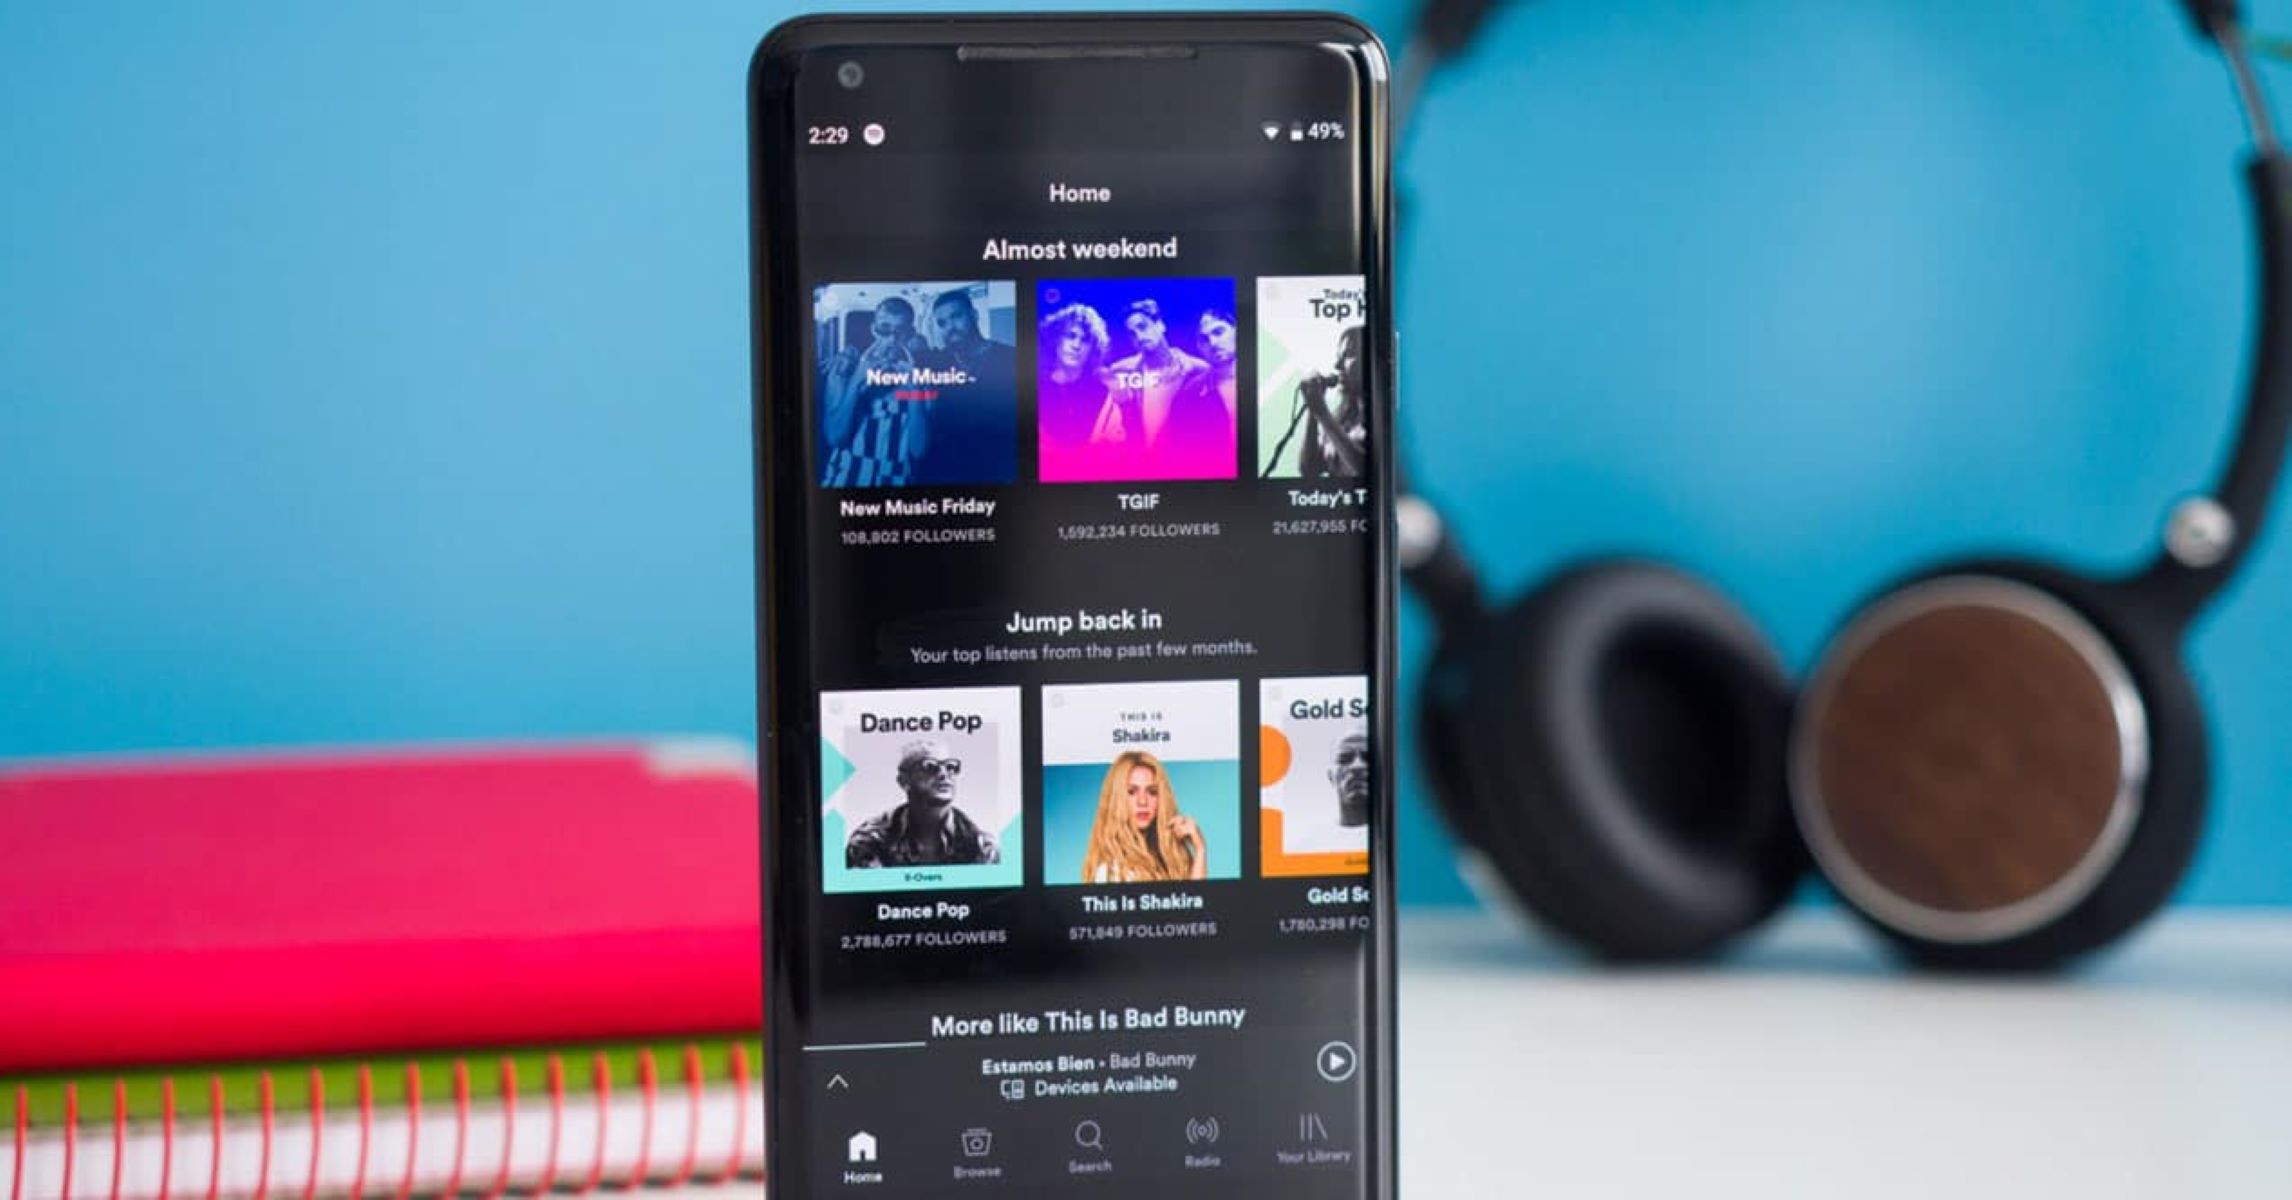 How To Check Your Top Songs On Spotify